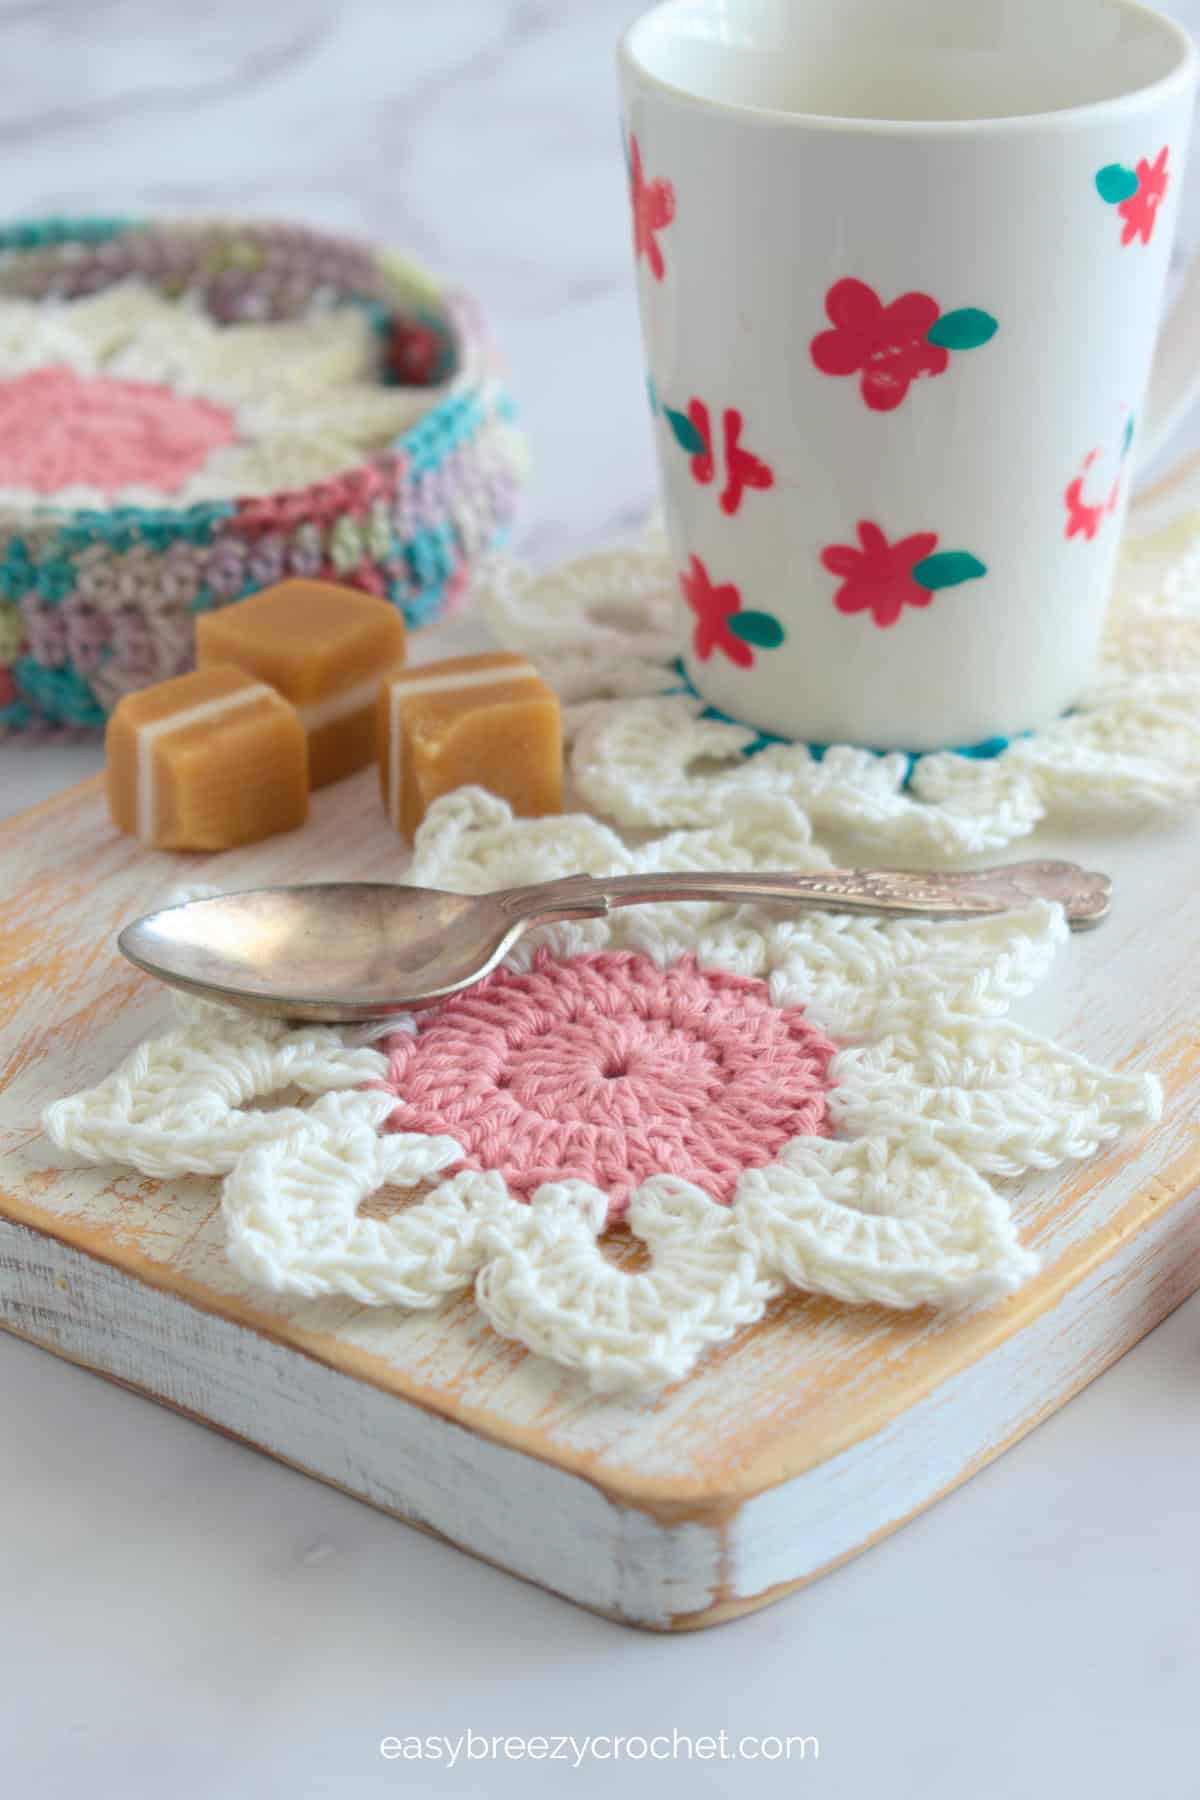 White sunflower coaster with pink center and a red and white cup.